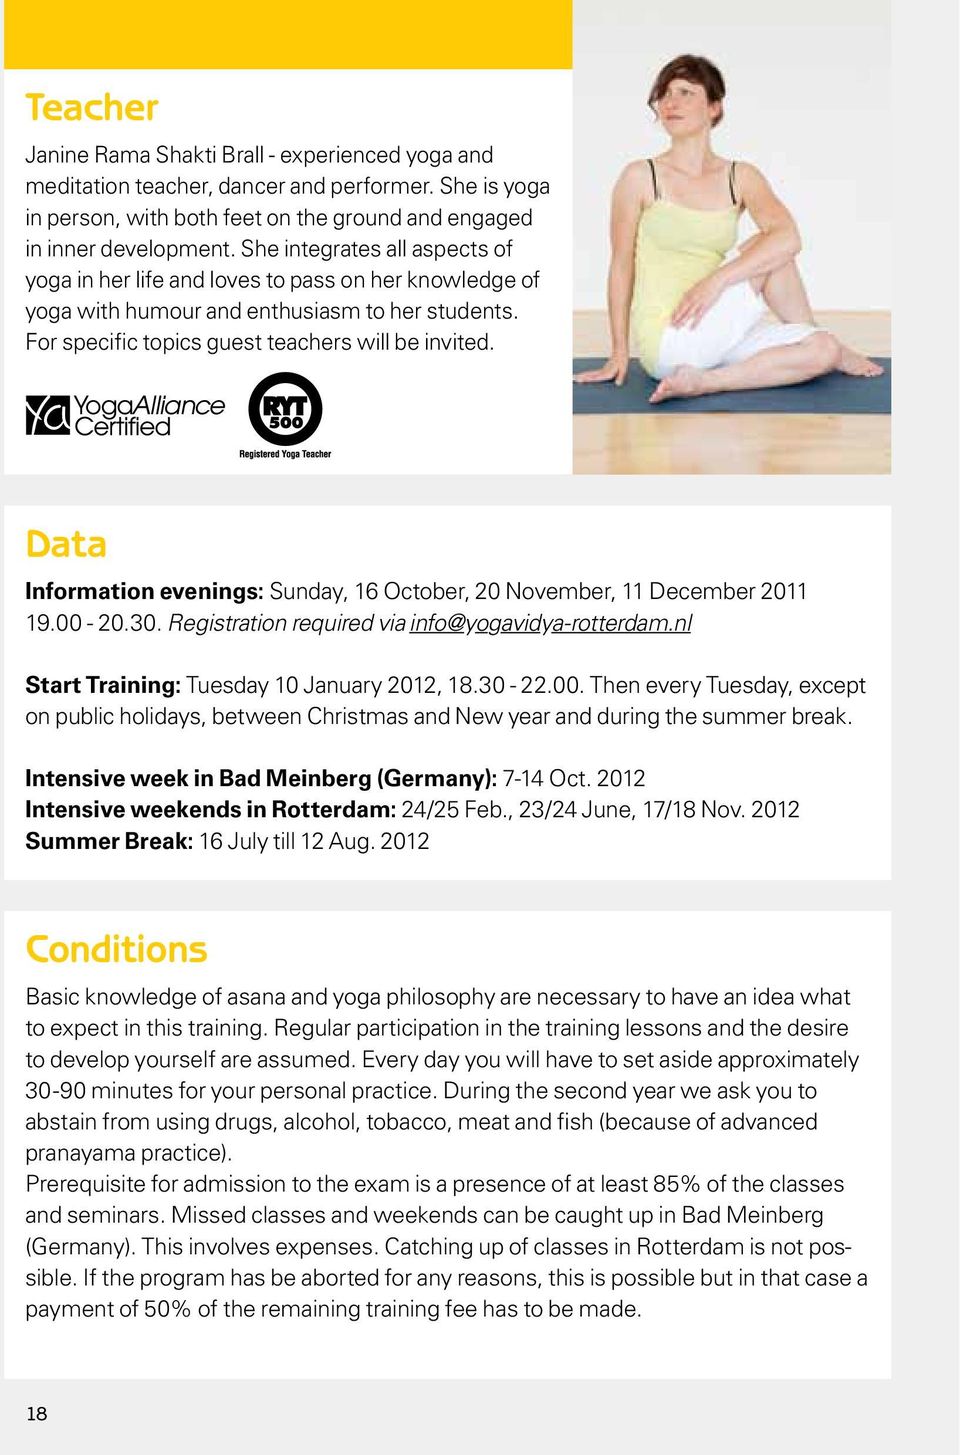 Data Information evenings: Sunday, 16 October, 20 November, 11 December 2011 19.00-20.30. Registration required via info@yogavidya-rotterdam.nl Start Training: Tuesday 10 January 2012, 18.30-22.00. Then every Tuesday, except on public holidays, between Christmas and New year and during the summer break.